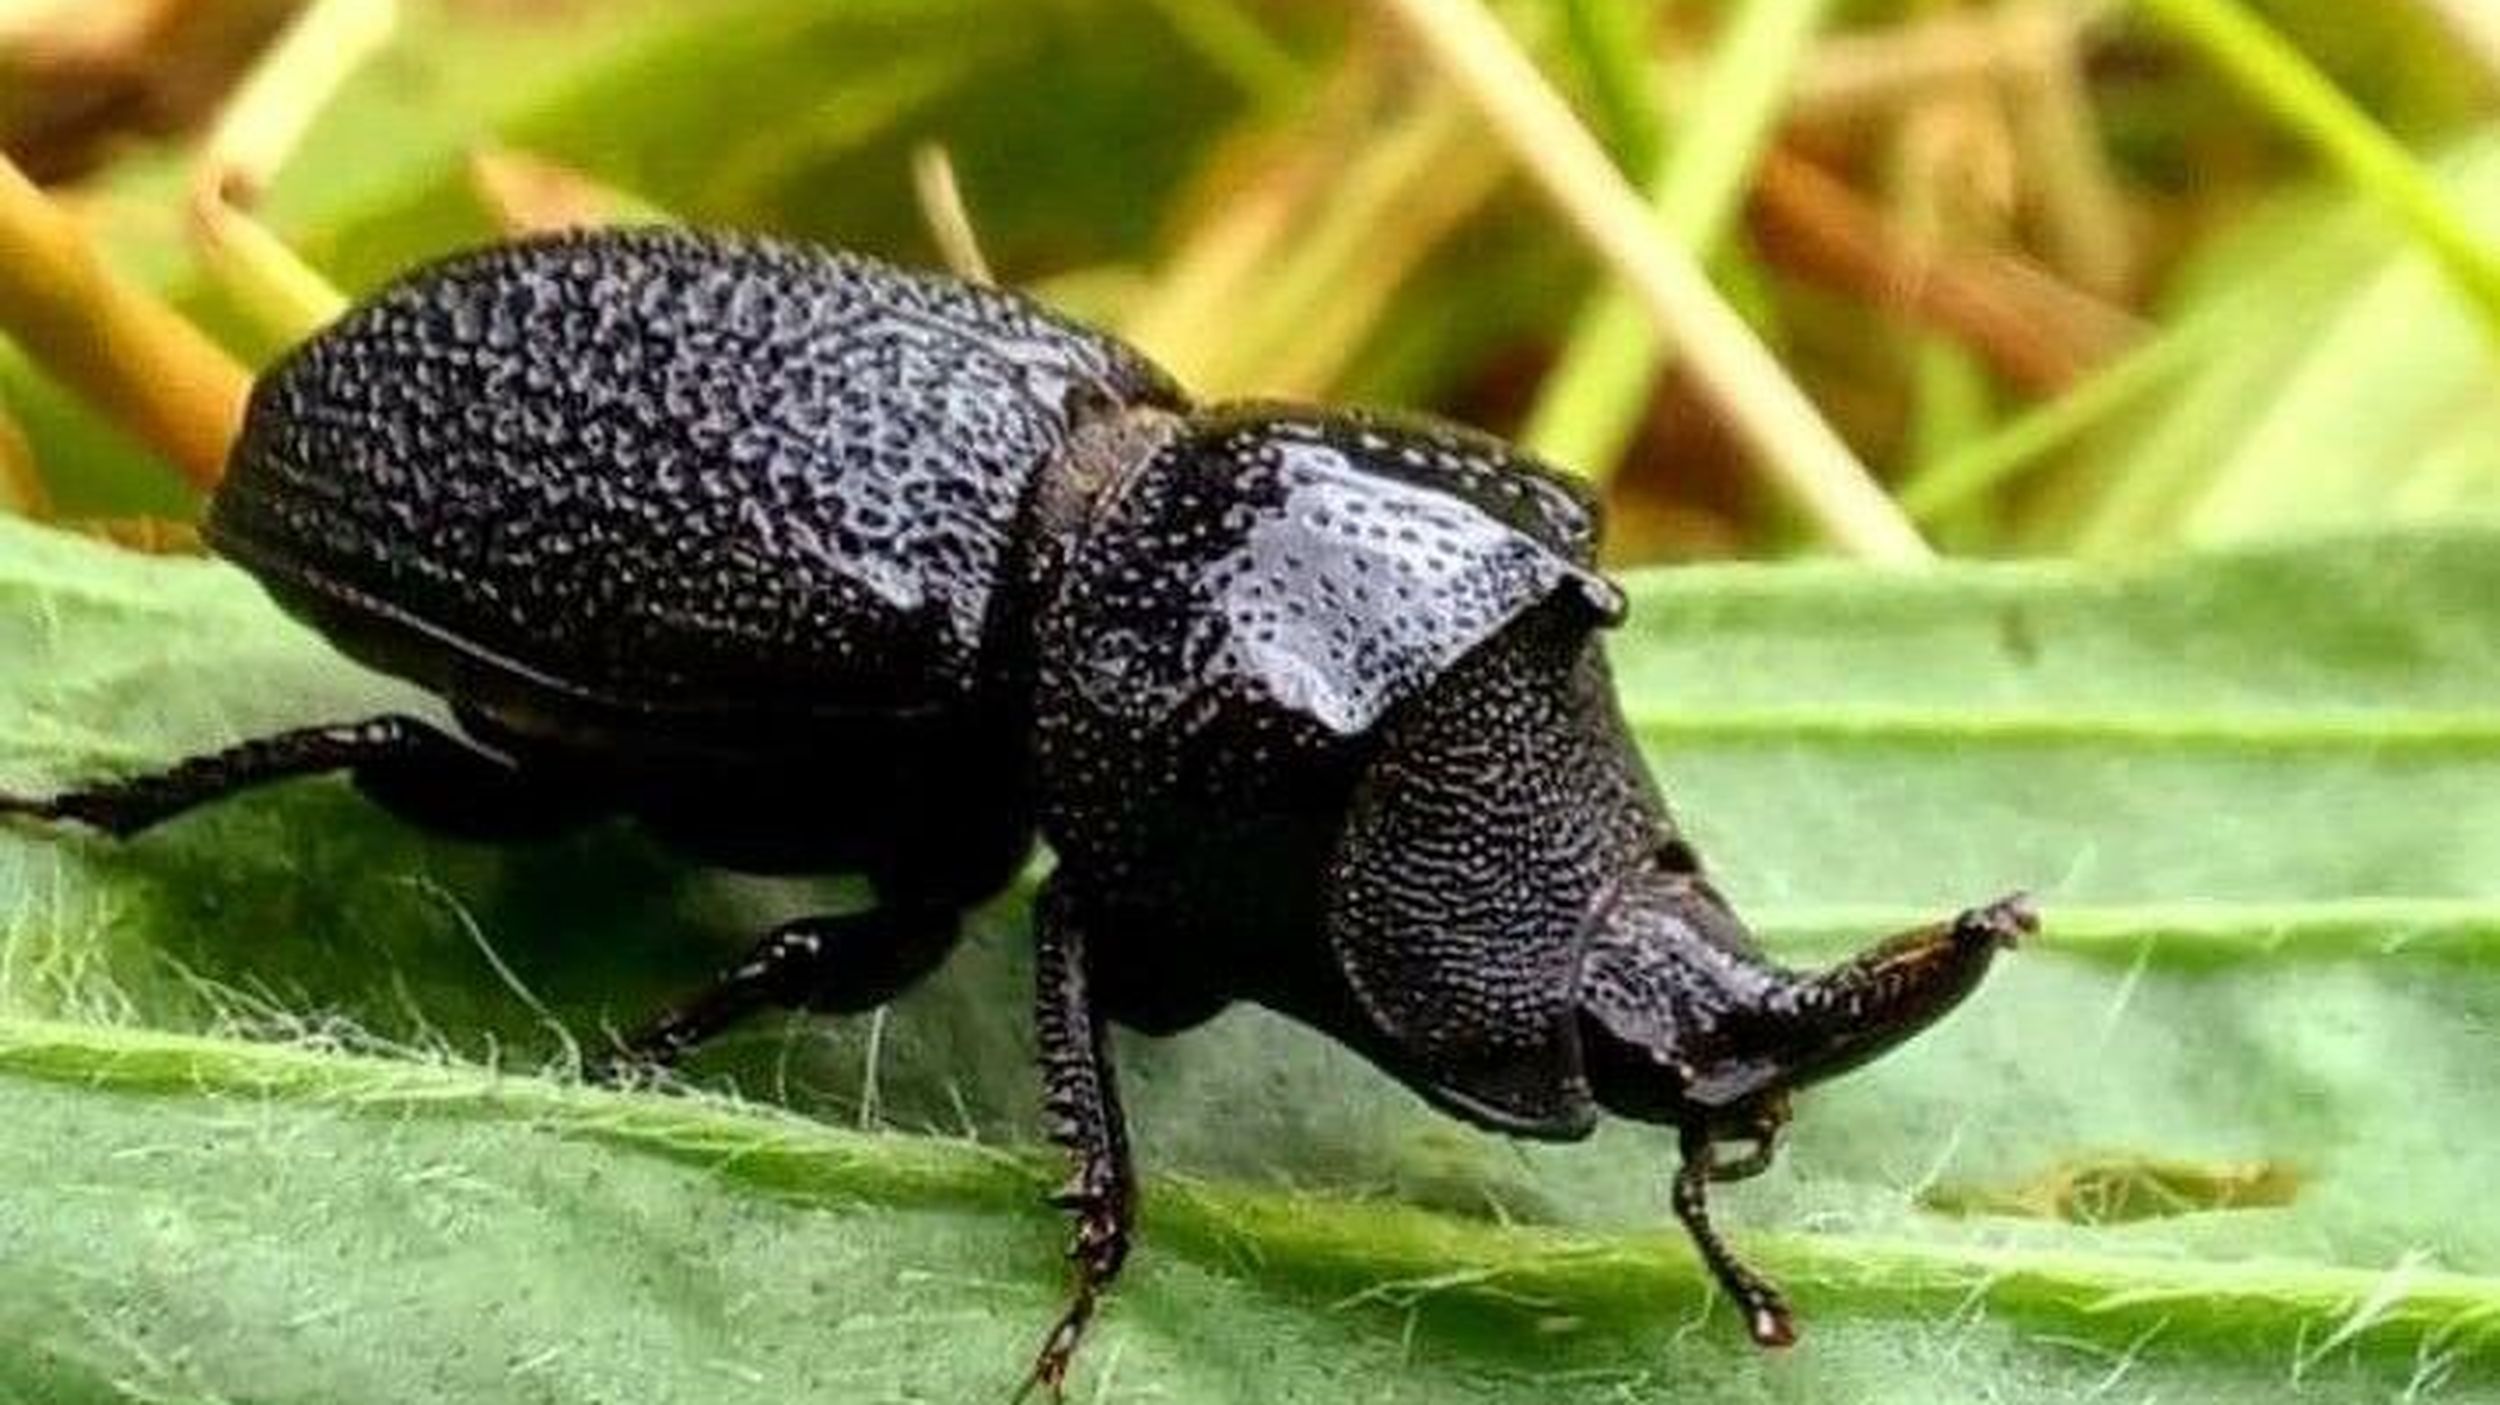 Bugging the Northwest: Meet the beetle that's 'not a problem insect'  despite its rhinoceros-looking horn